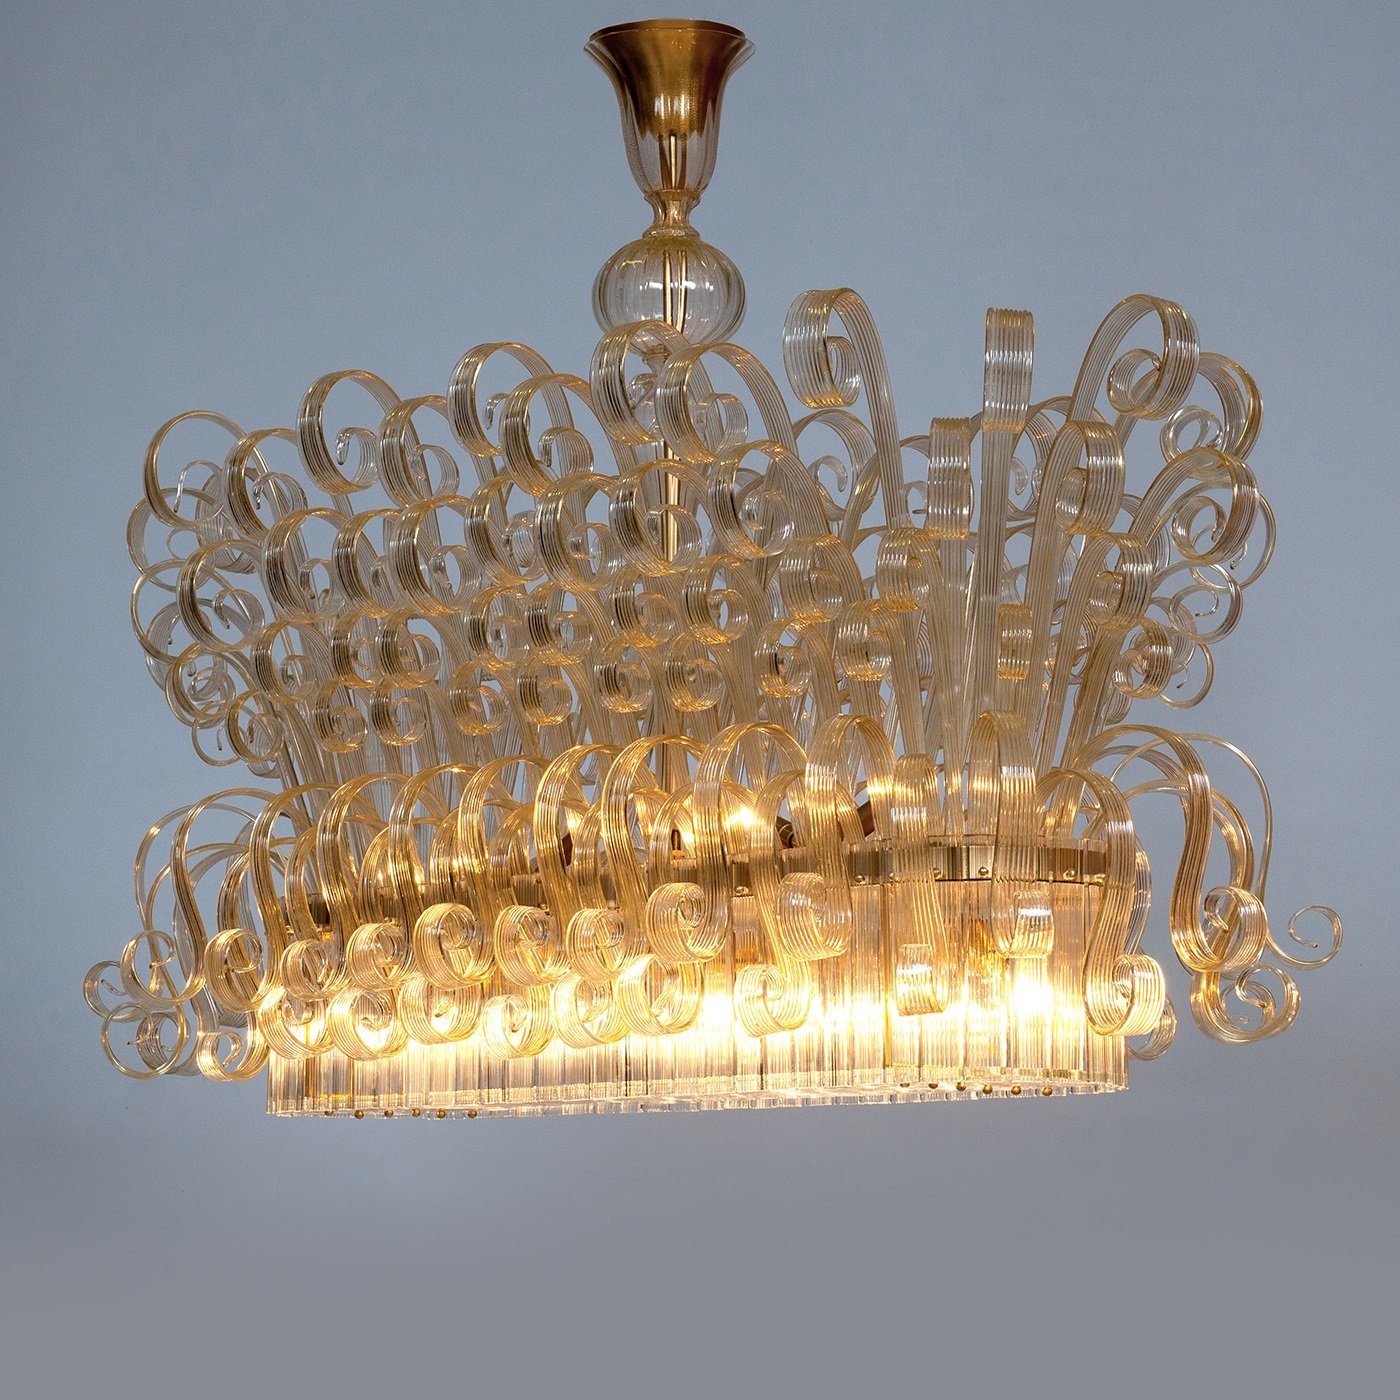 Limited Edition Italian Chandelier with 24K Gold - Alternative view 4